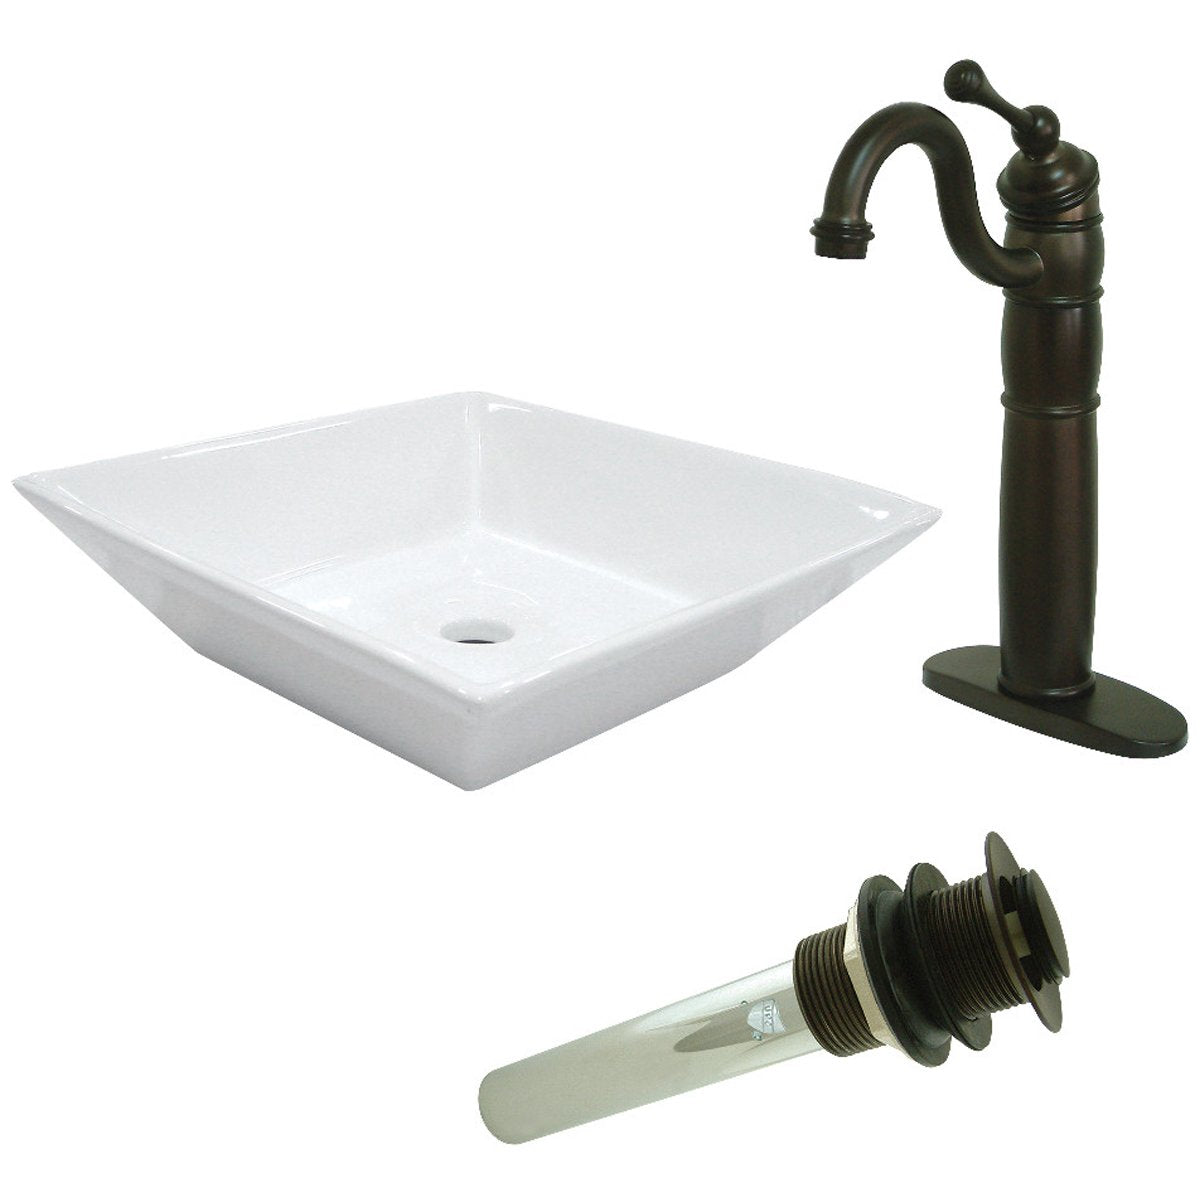 Kingston Brass Vessel Sink with Heritage Sink Faucet and Drain Combo